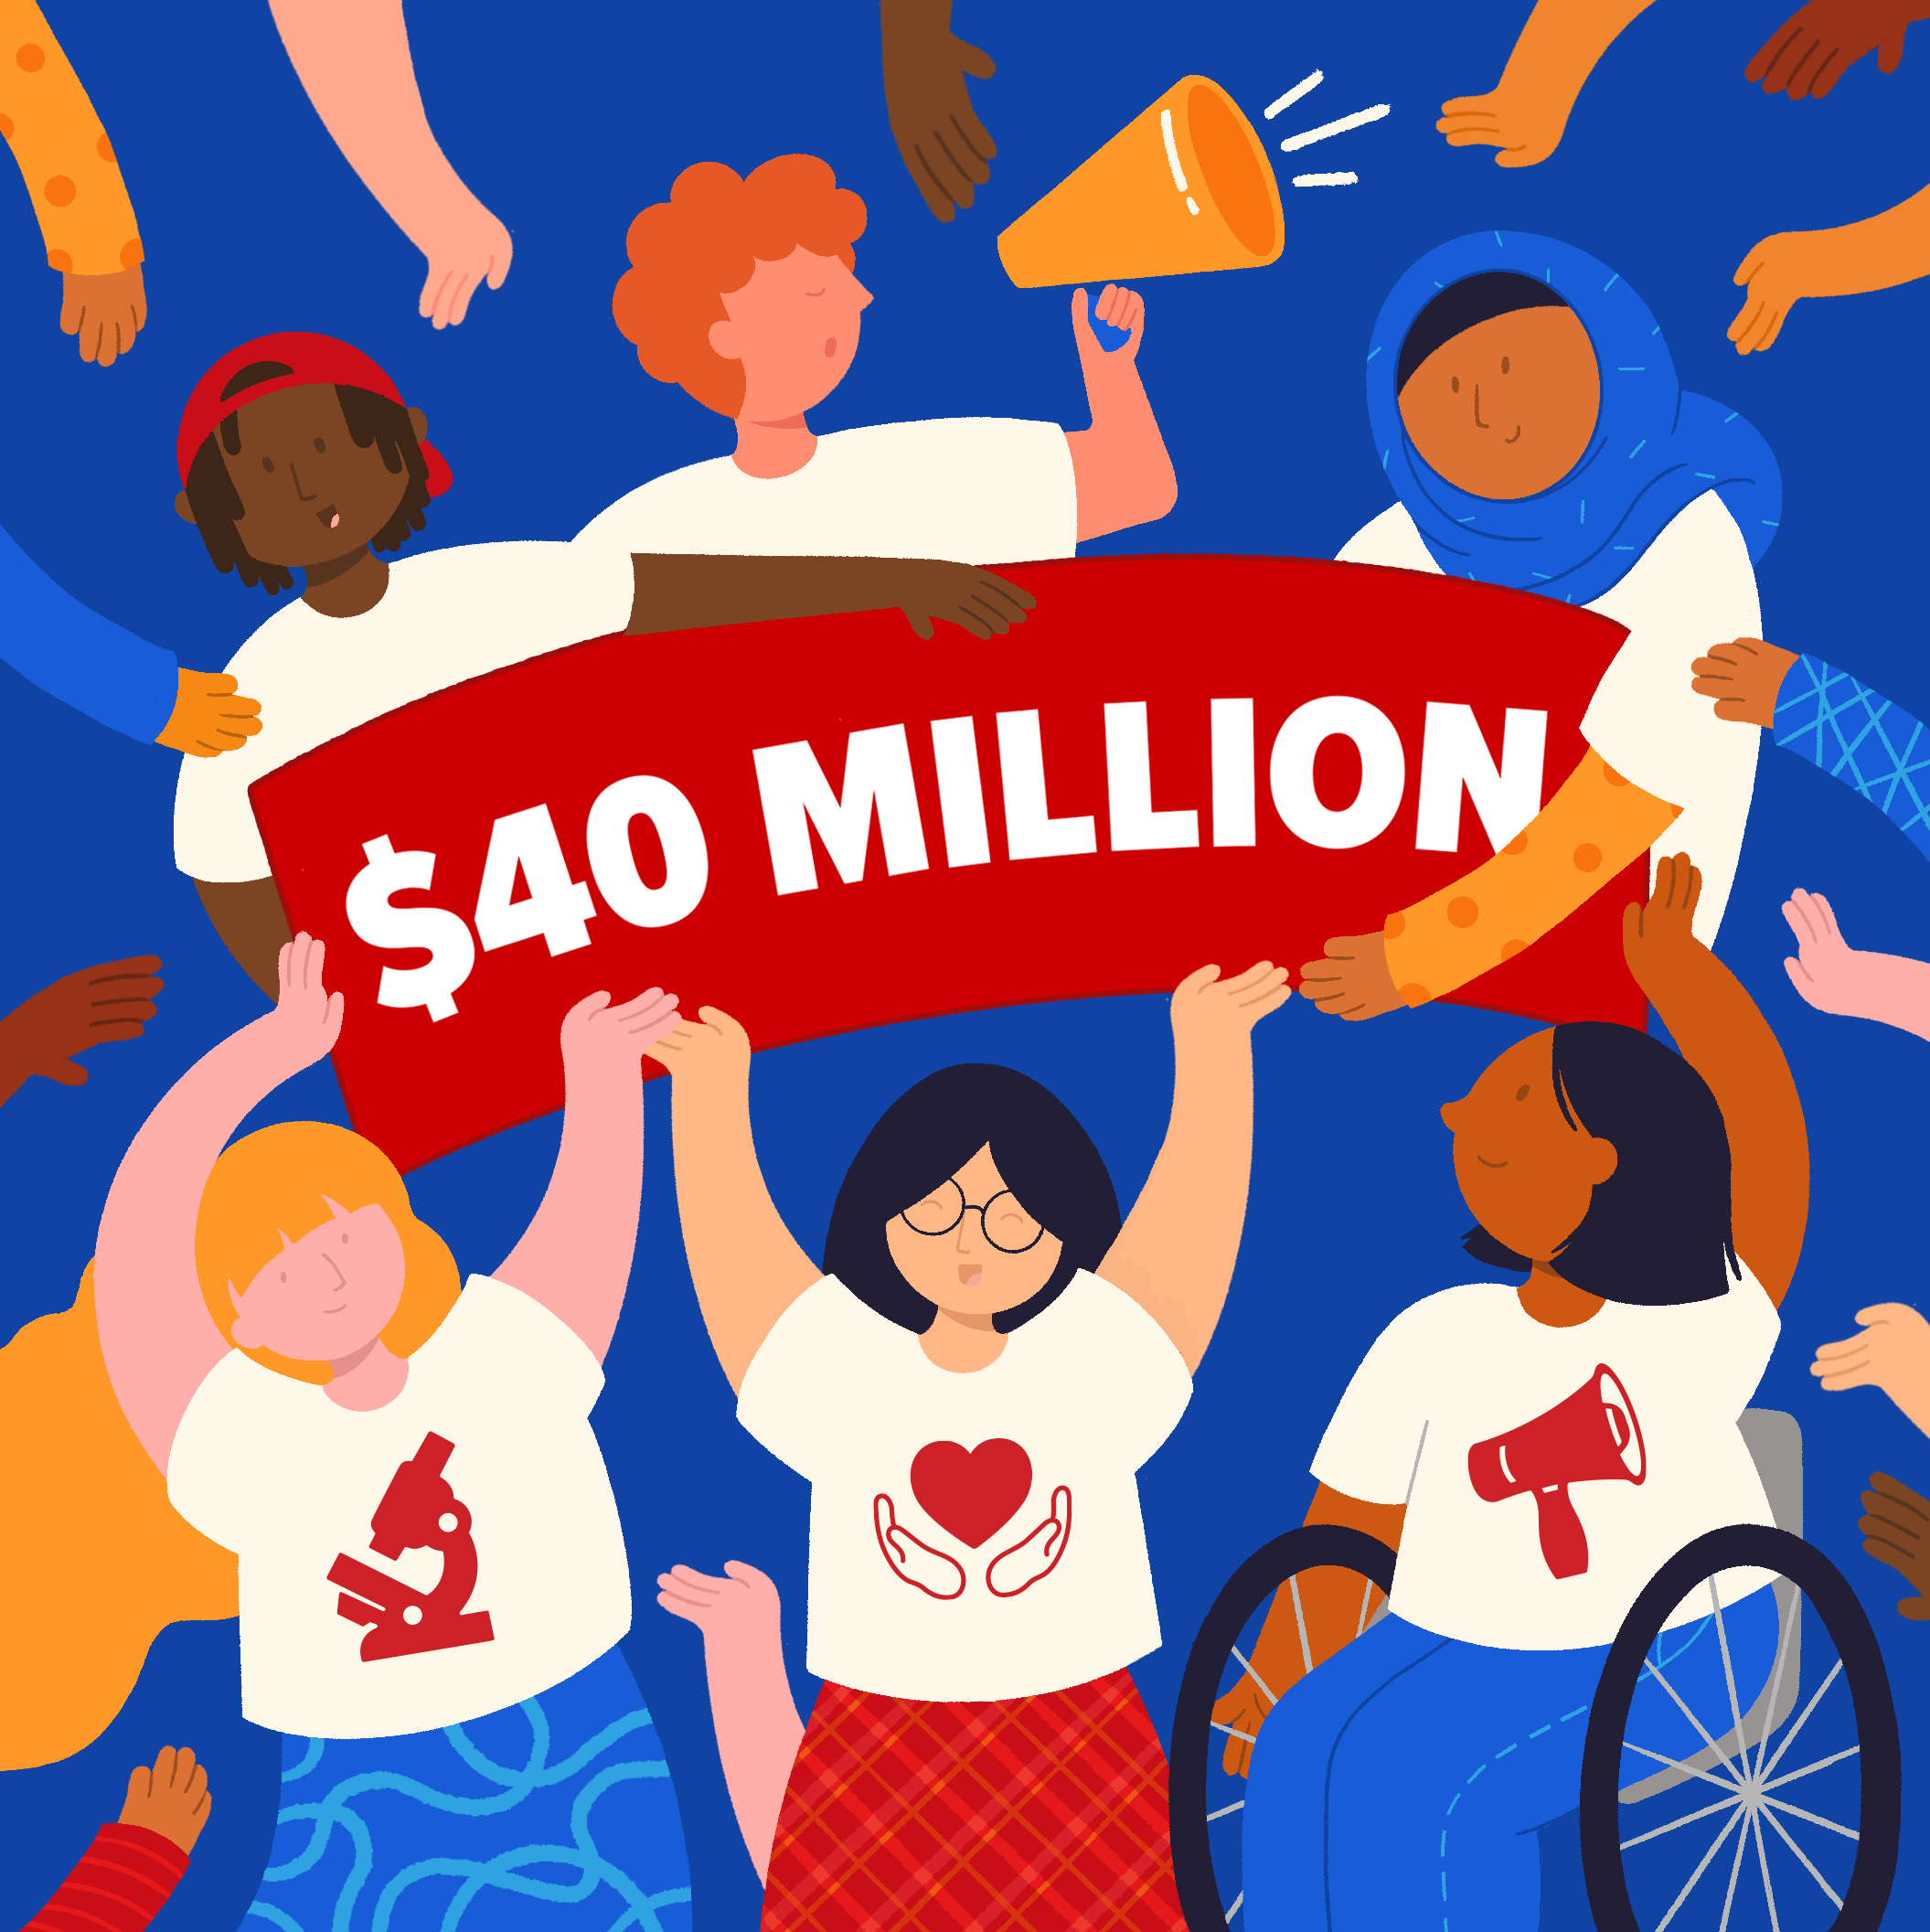 Illustration of students holding up a &quot;$40 Million&quot; banner